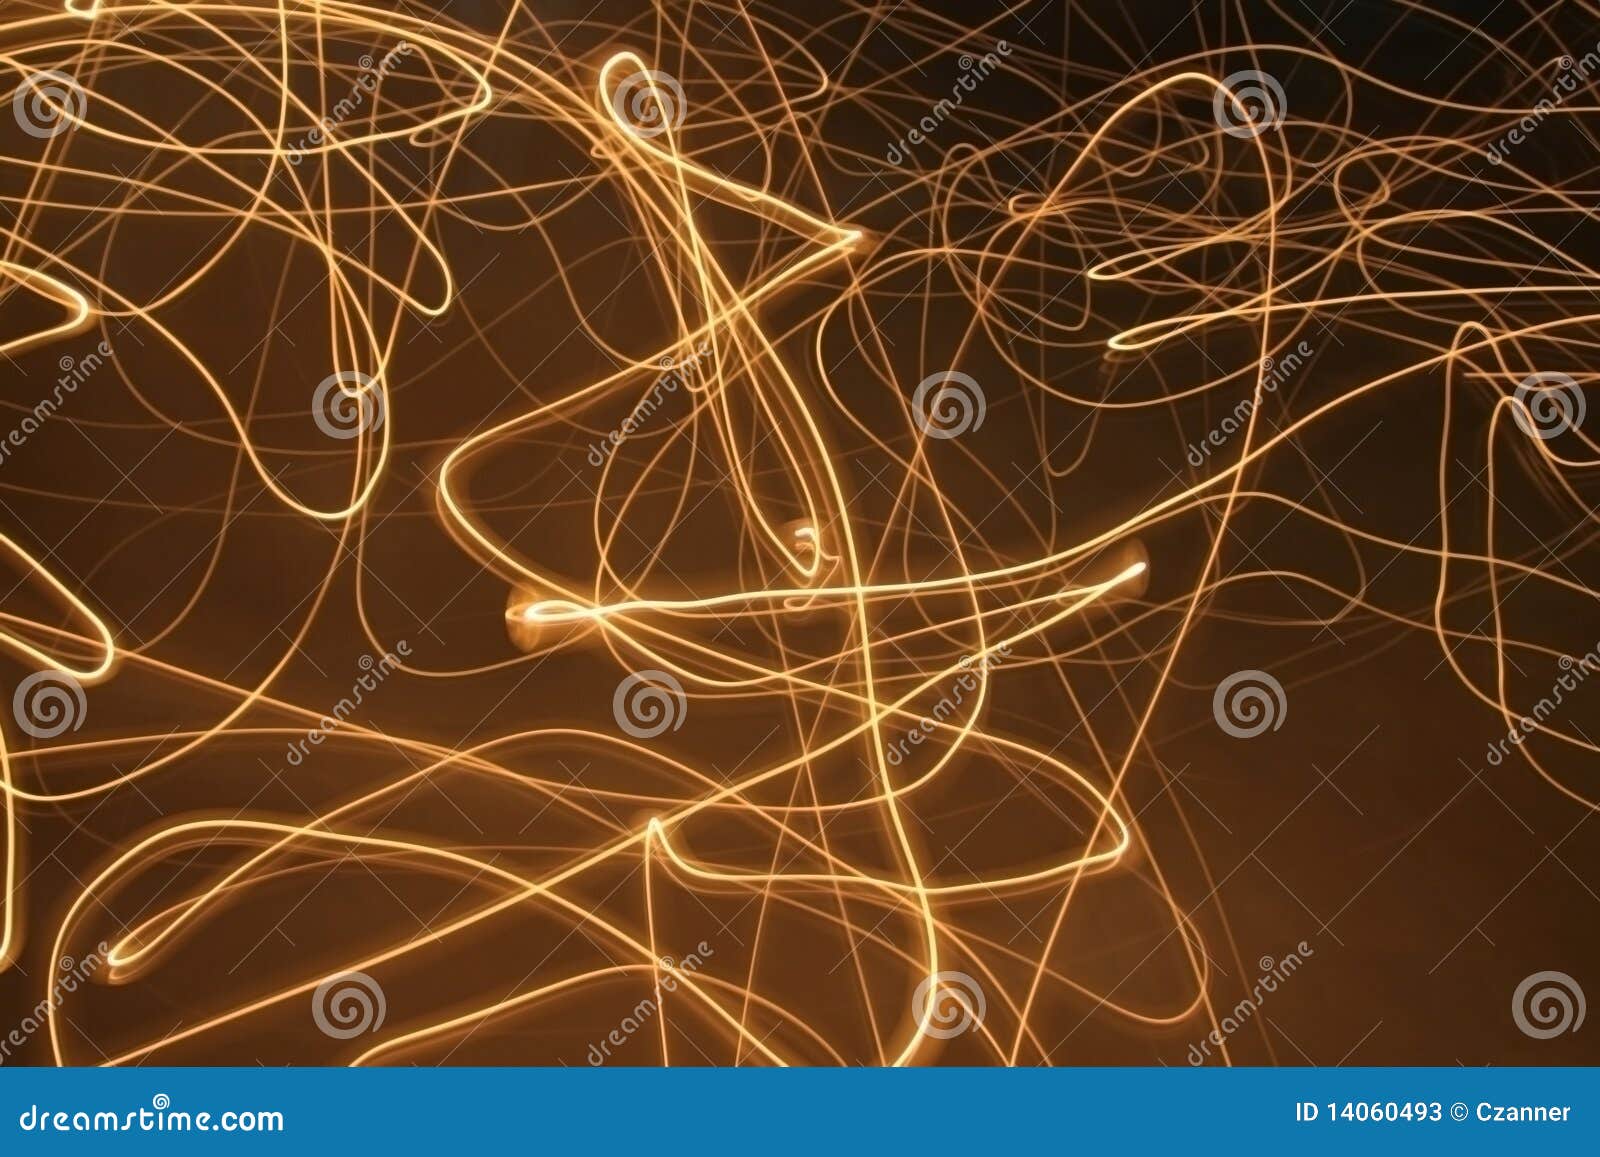 Flame lines stock image. Image of effect, wallpaper, night - 14060493